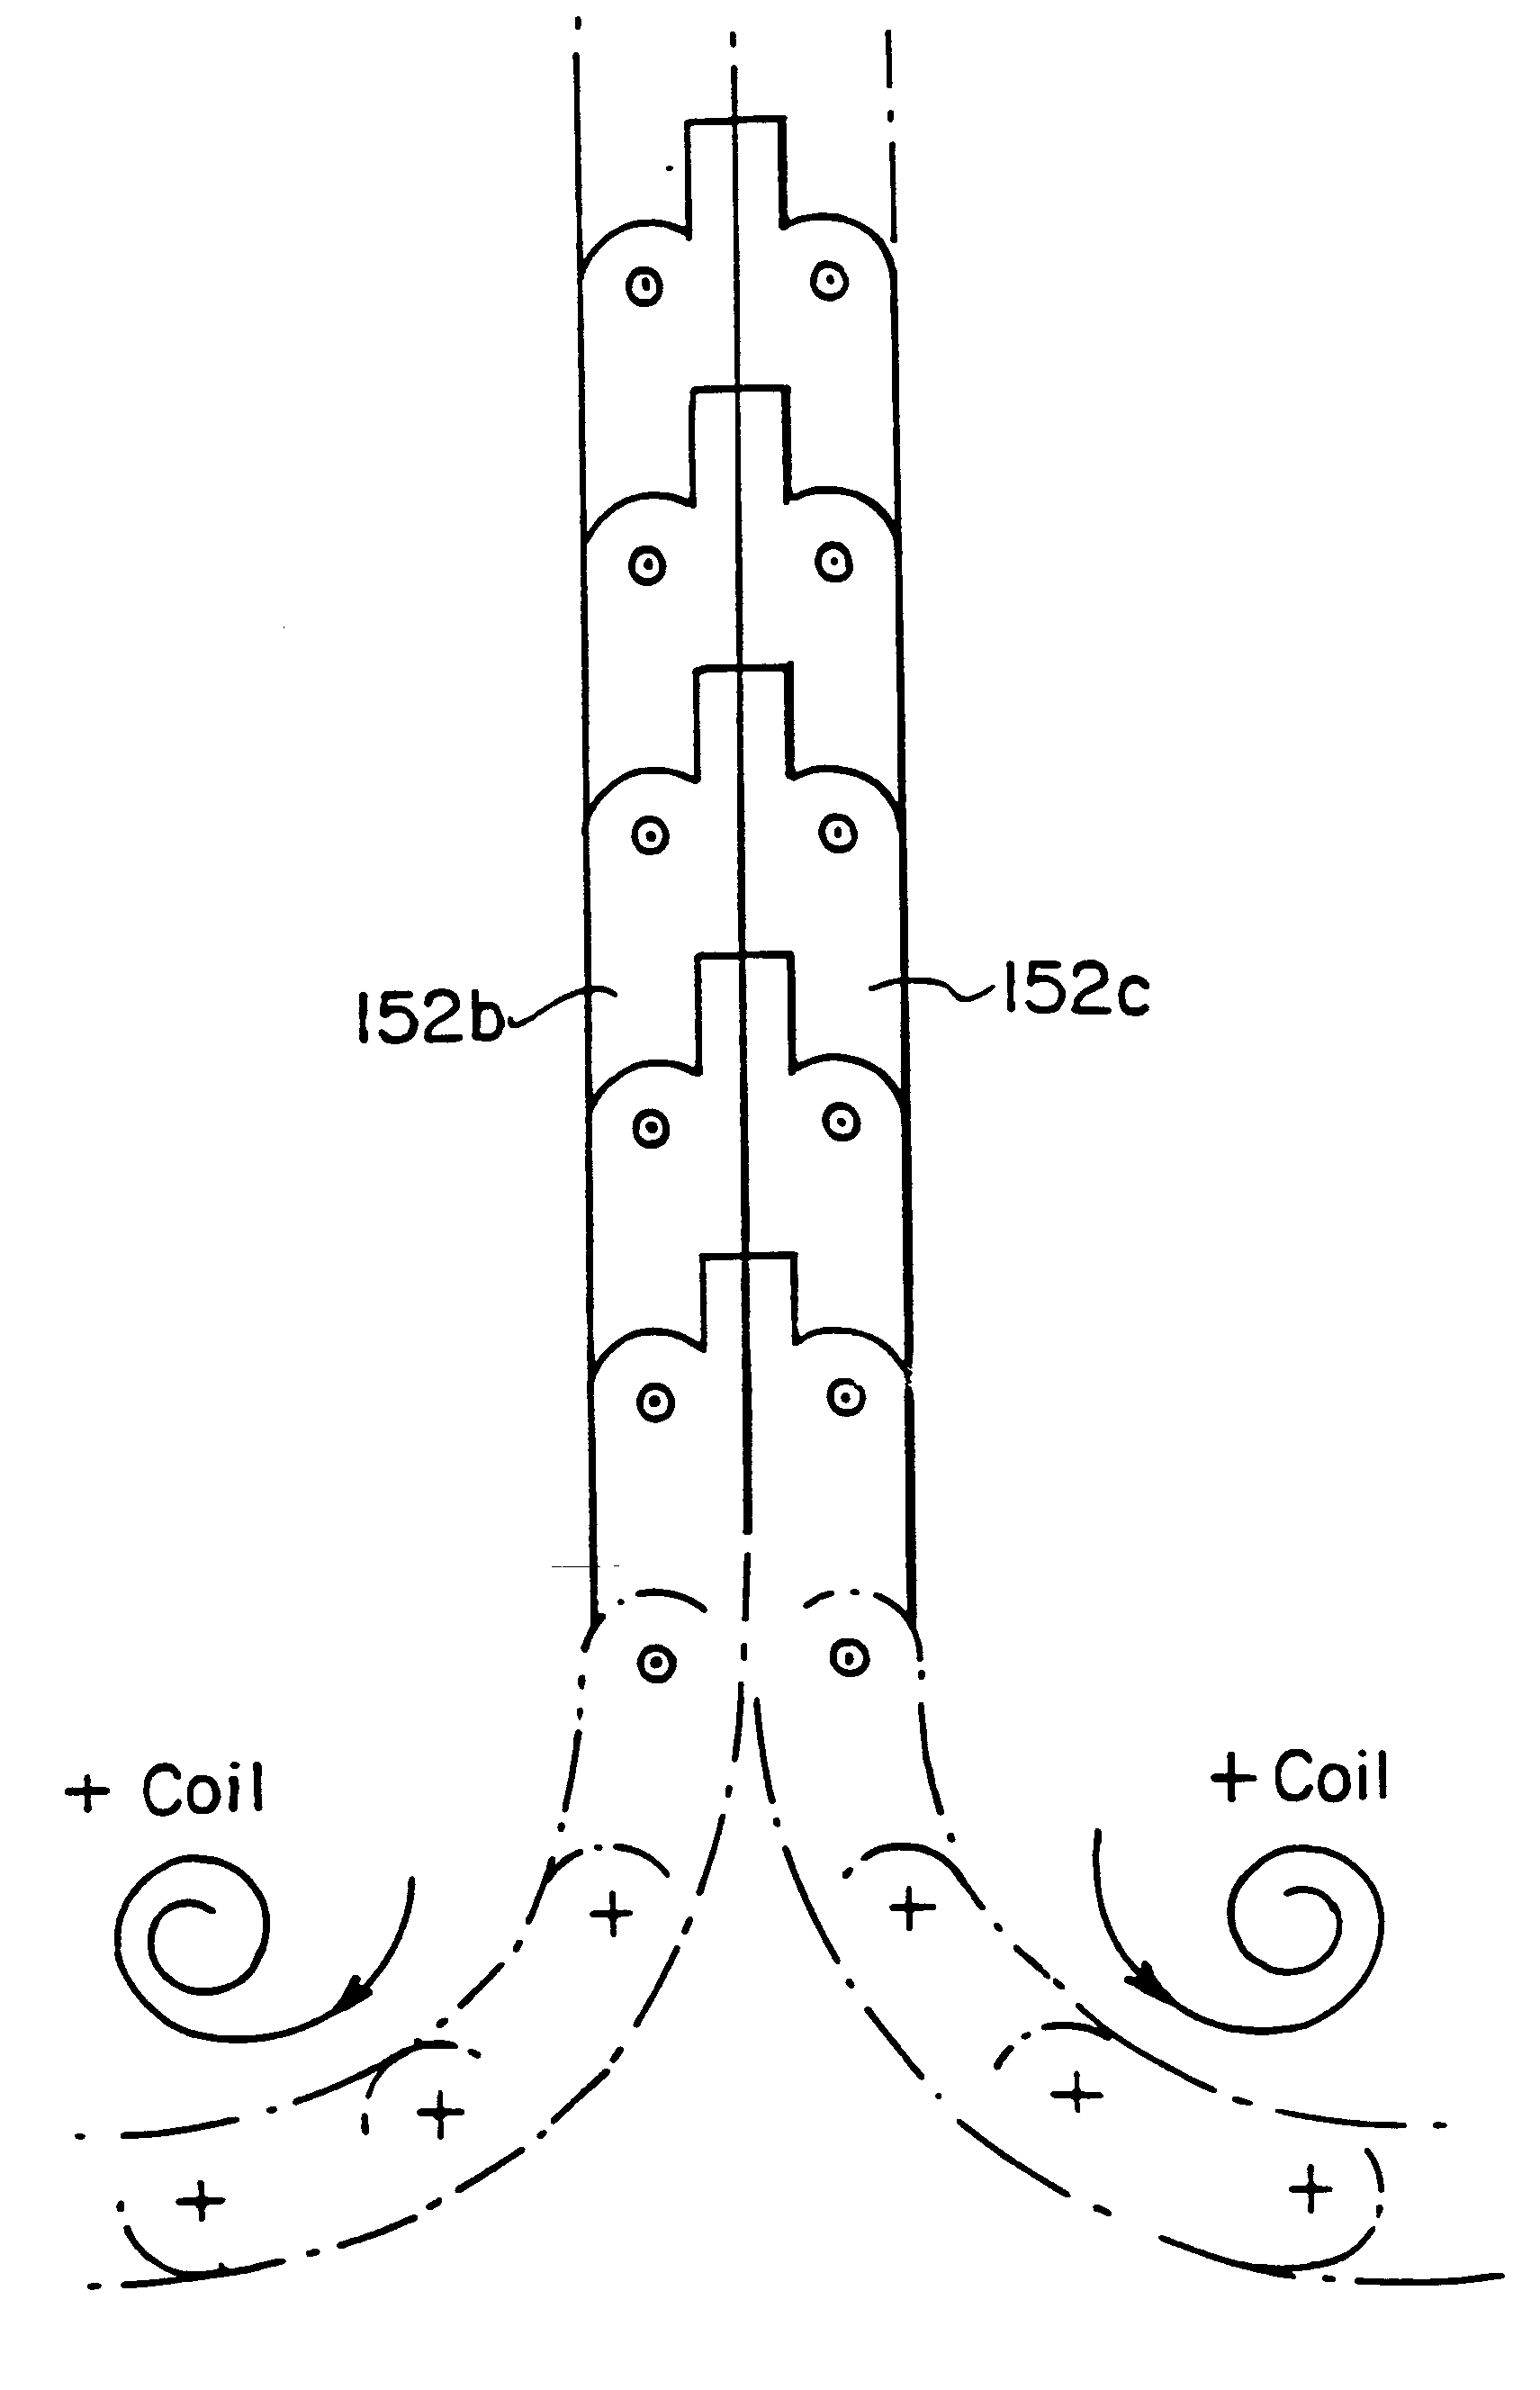 Deployment system for an upper bundle steam generator cleaning/inspection device